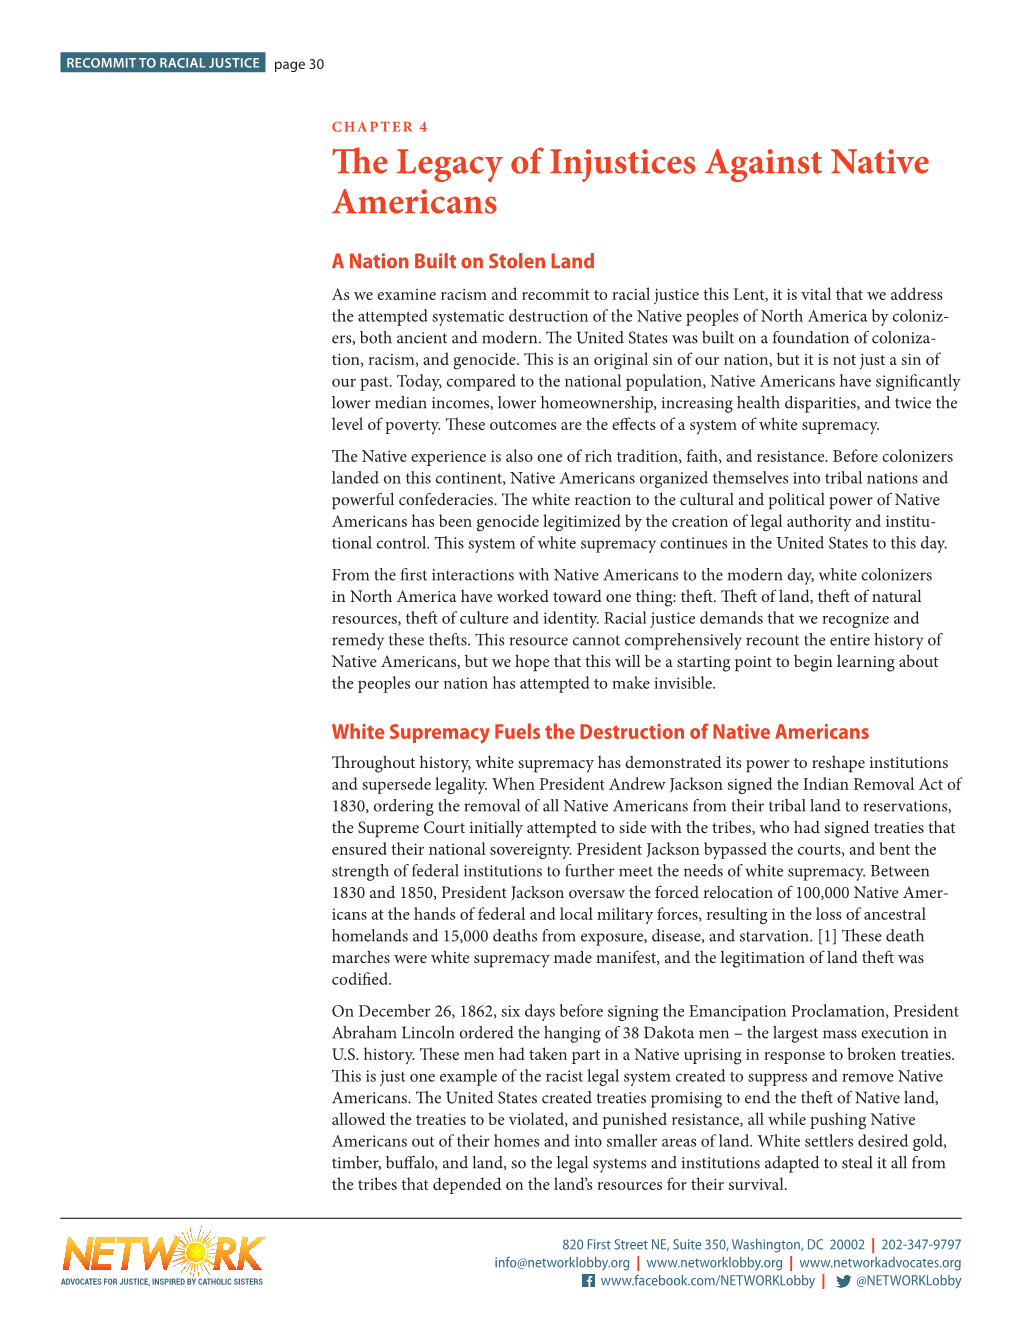 The Legacy of Injustices Against Native Americans